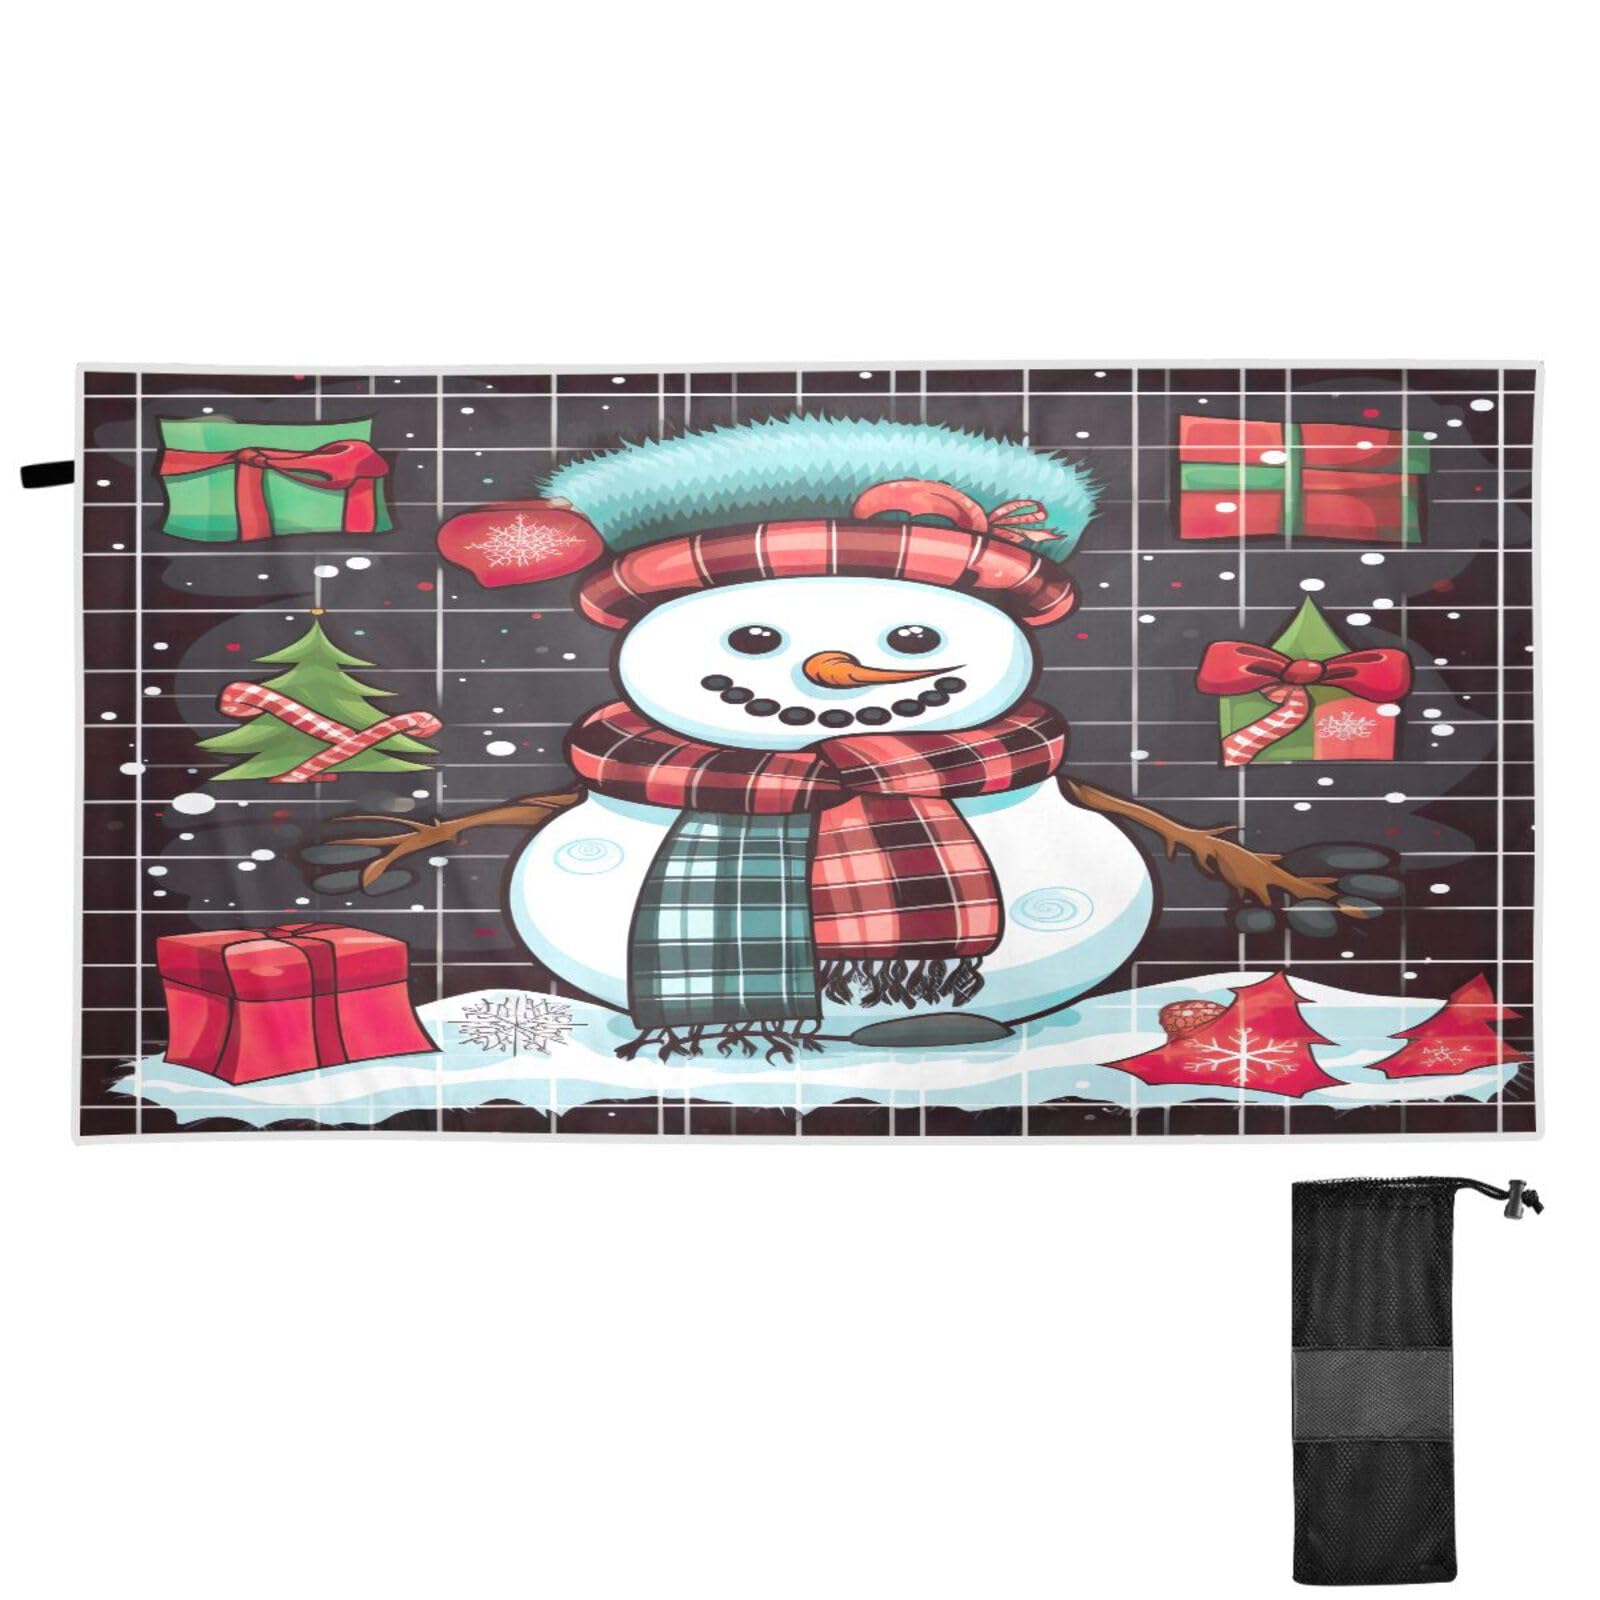 Christmas Snowman Gift Beach Towel Sand Free Beach Blanket Quick Dry Towel Pool Towels Travel Towel Beach Towels Oversized for Women Men Swimming Camping Gym Sports Beach Essentials M